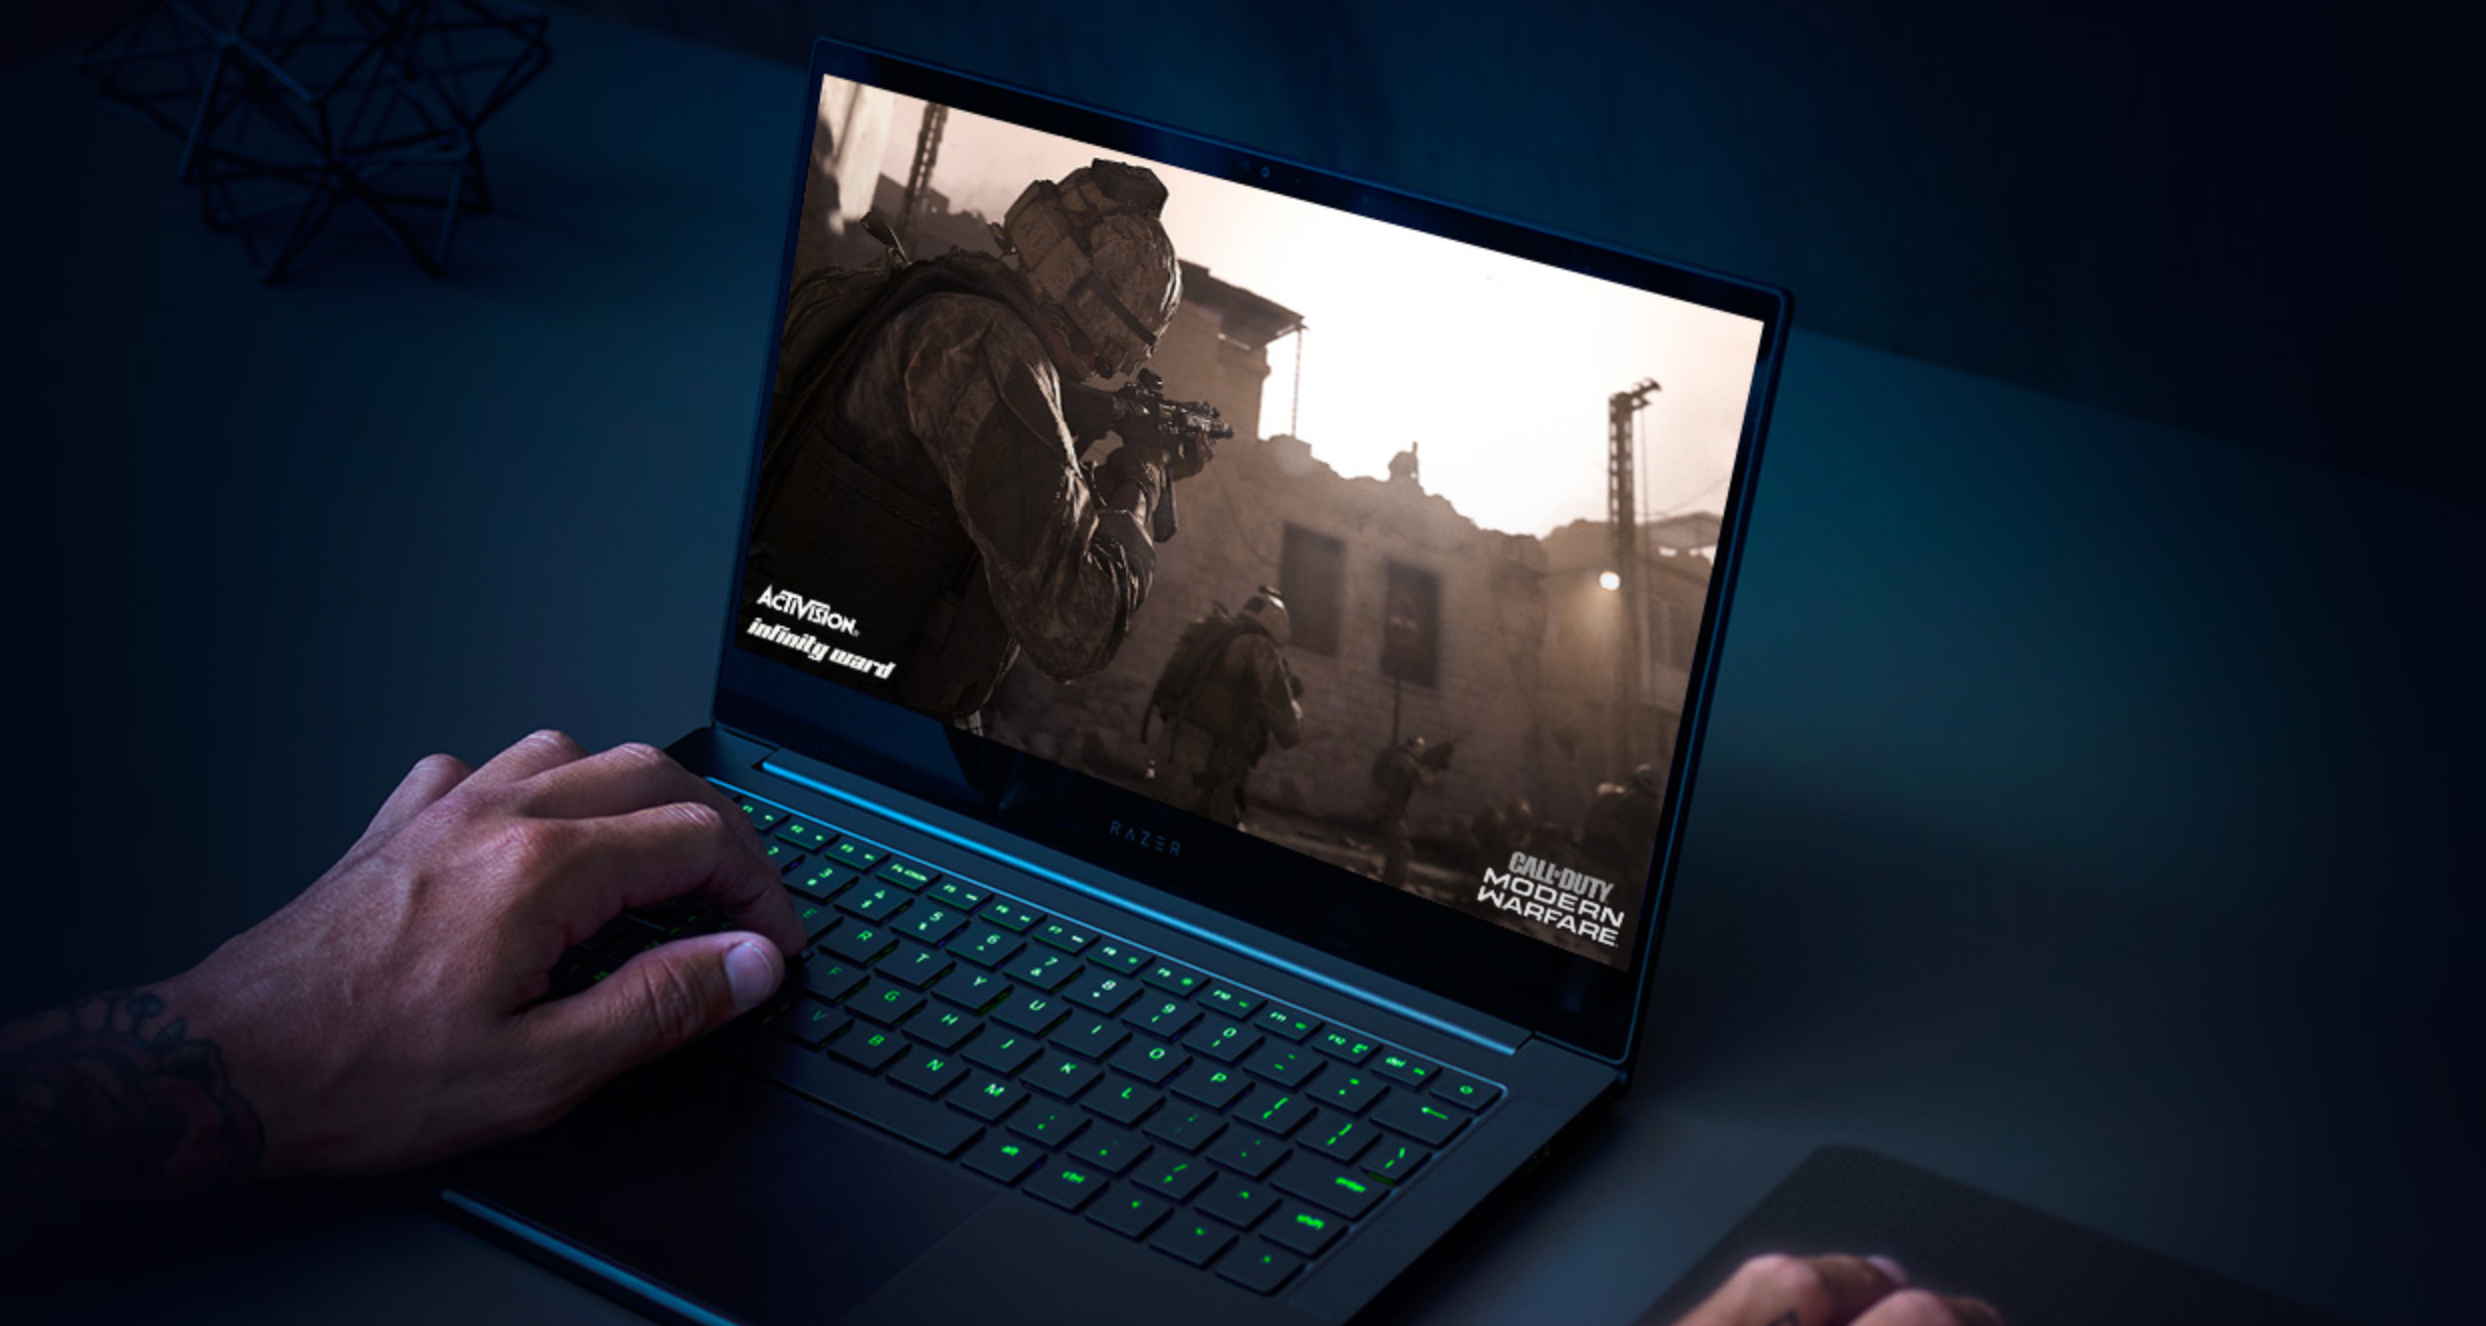 Don T Call The Razer Blade Stealth With Gtx 1650 An Ultrabook By Patrick Cleath Medium